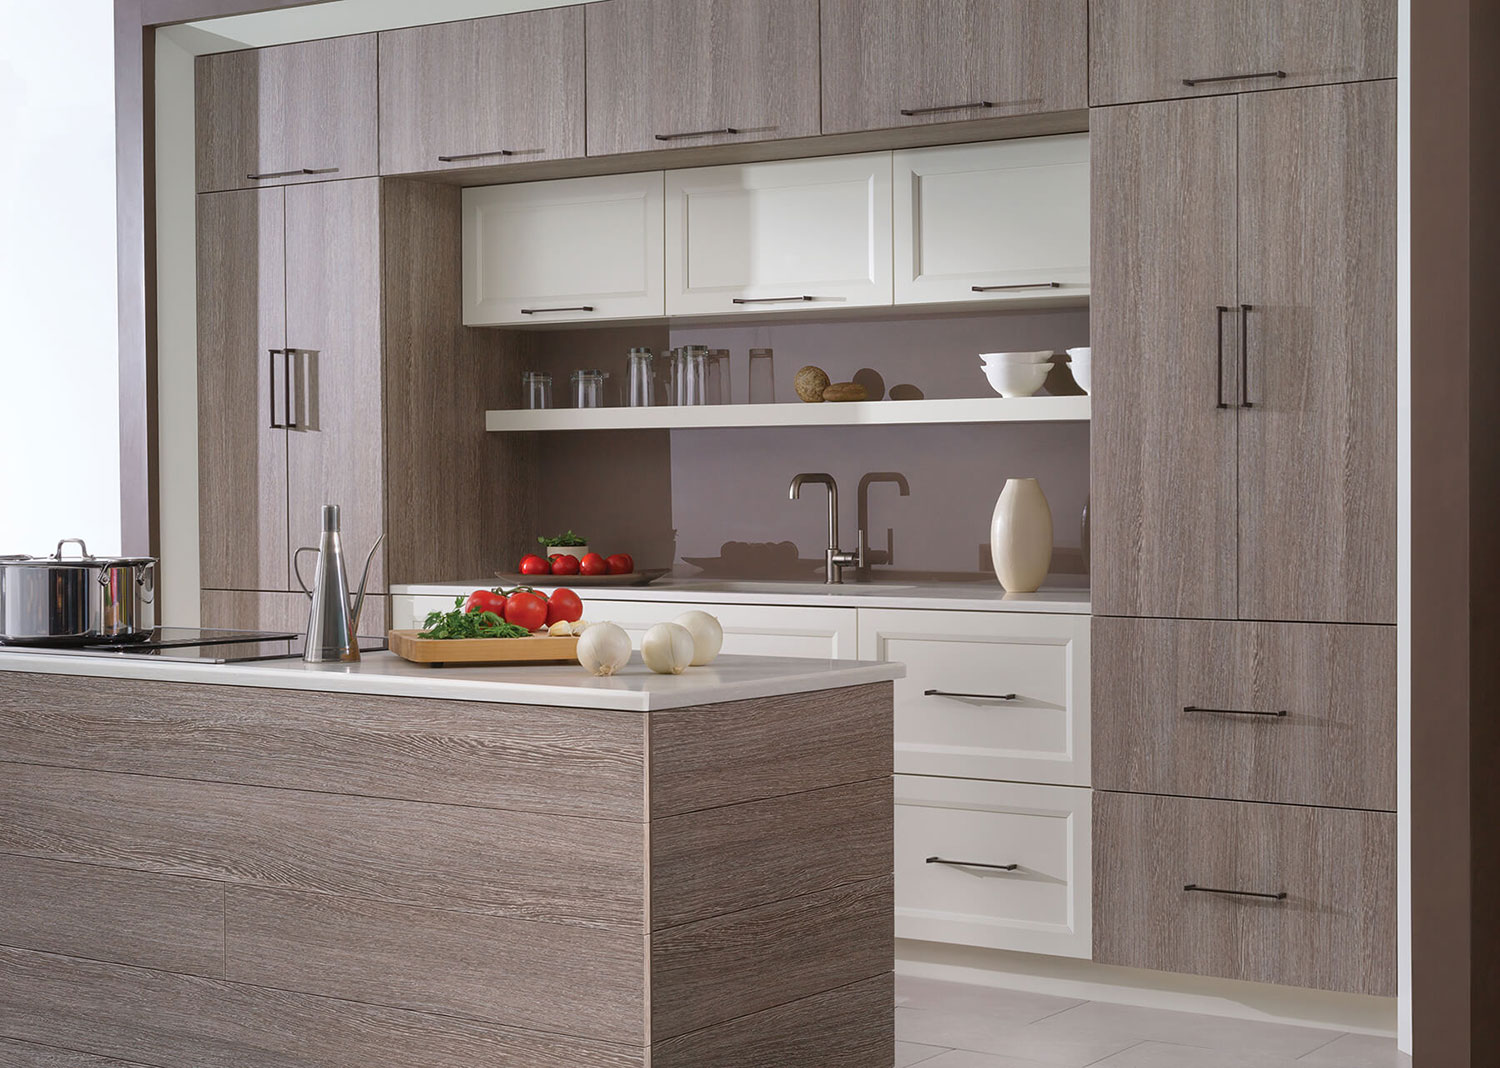 Laminate Kitchen Style and Affordability The